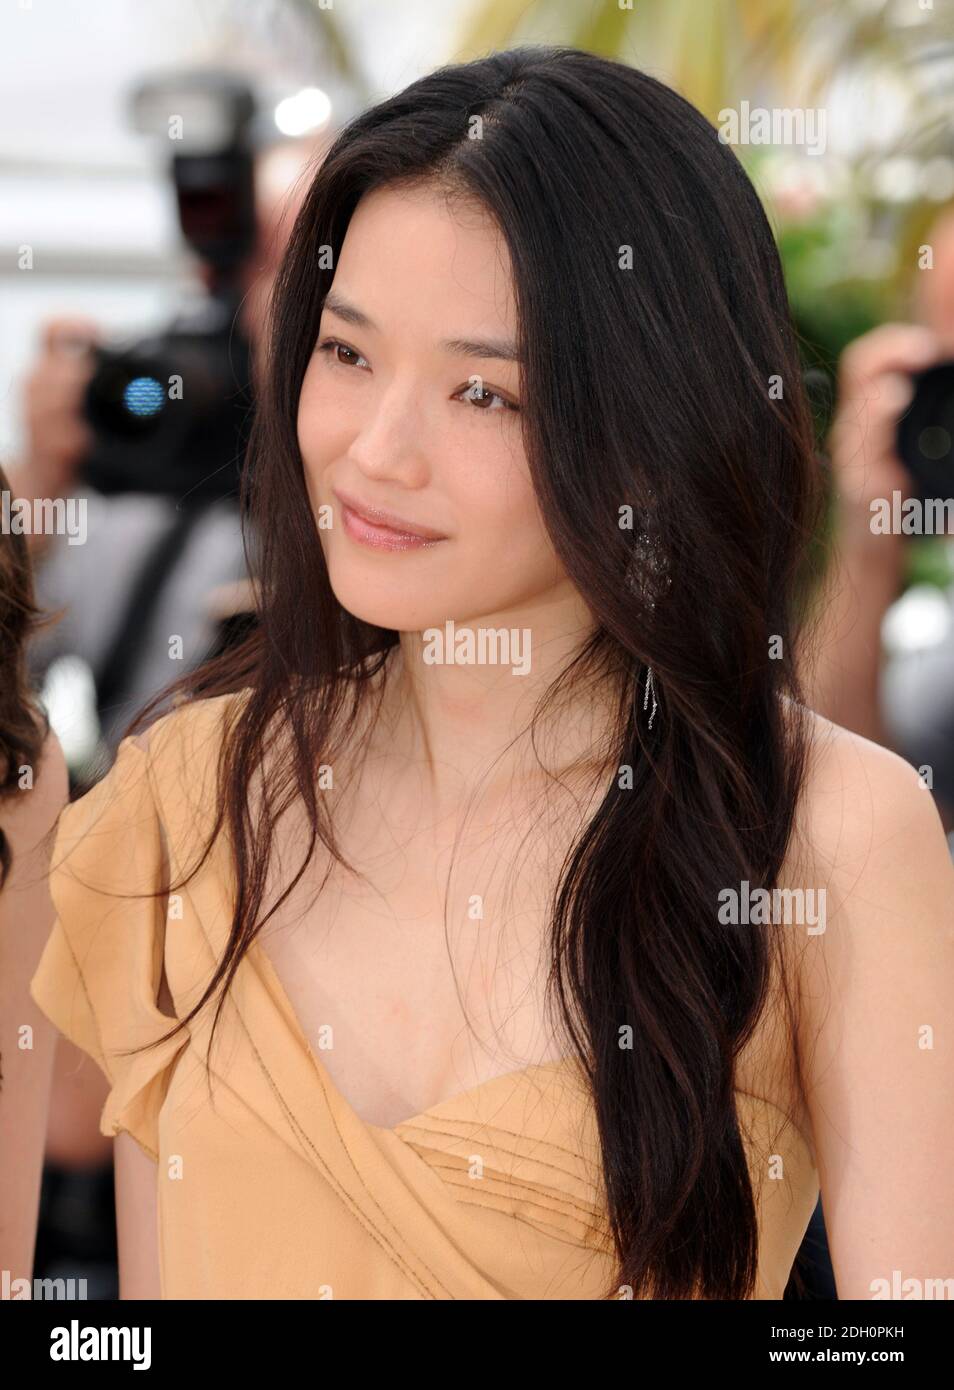 Shu Qi attending the photocall for the 62nd Festival de Cannes Jury, at the Palais des Festival in Cannes, part of the 62nd Cannes Film Festival. Stock Photo